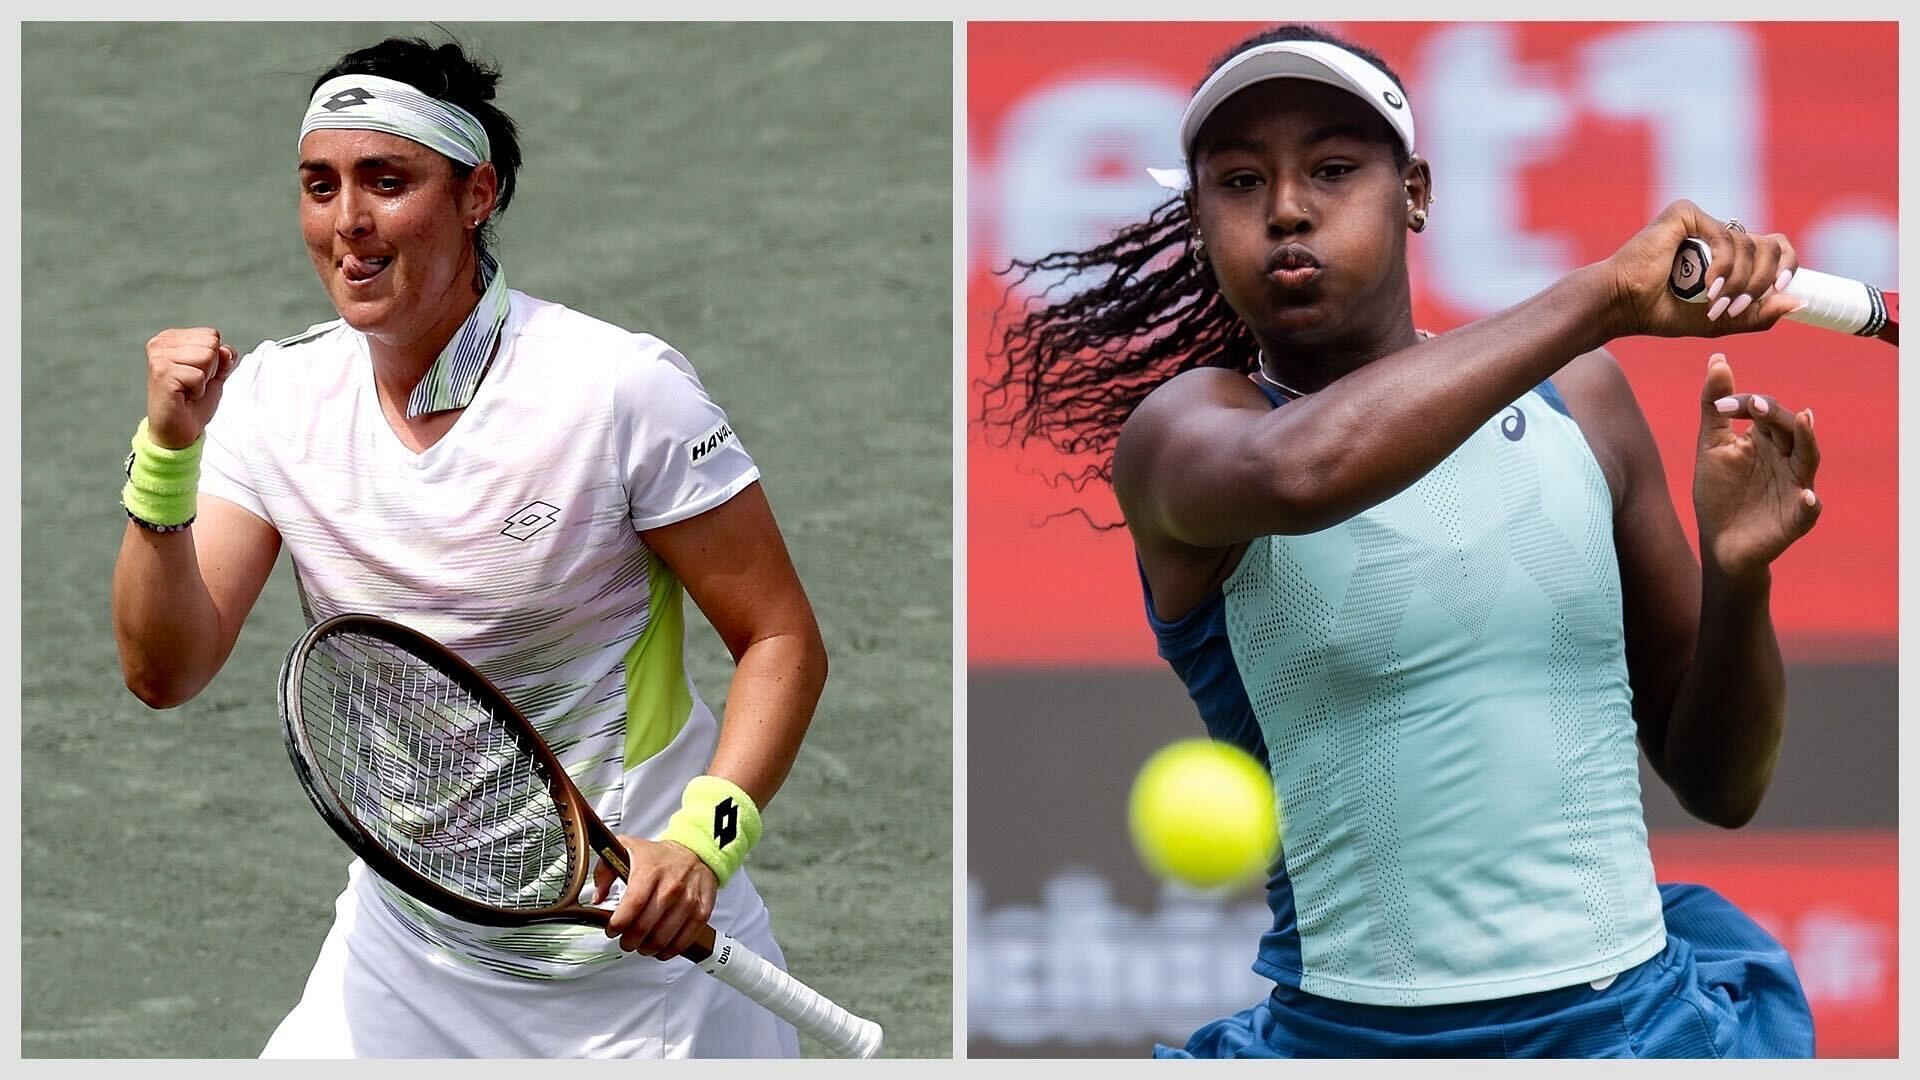 Ons Jabeur vs Alycia Parks is one of the second round matches at the 2023 Guadalajara Open.